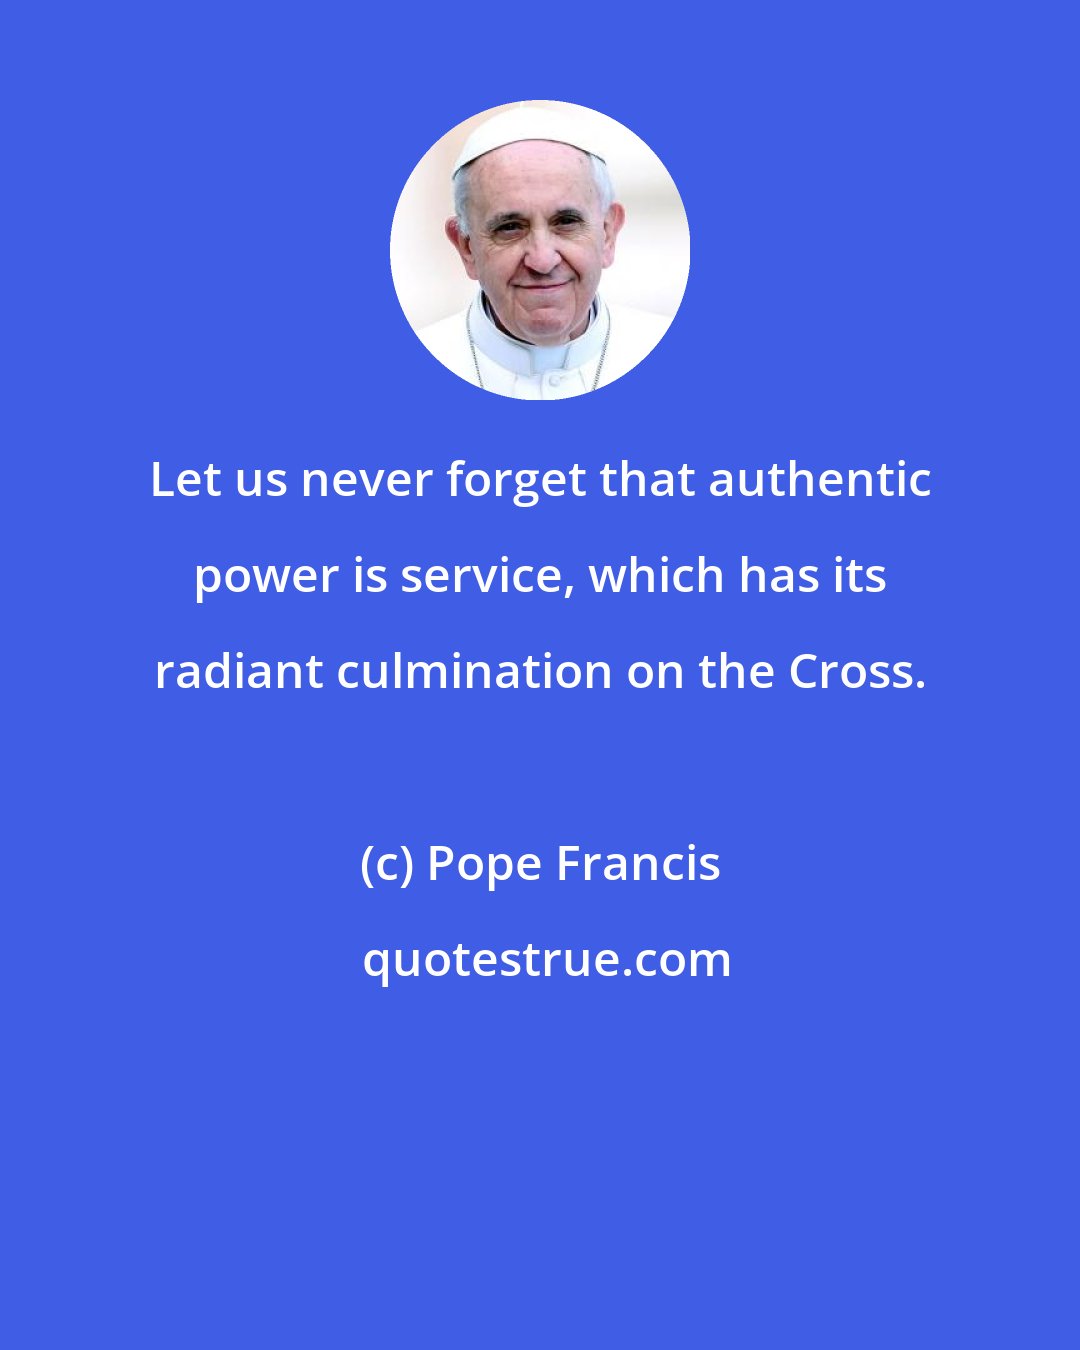 Pope Francis: Let us never forget that authentic power is service, which has its radiant culmination on the Cross.